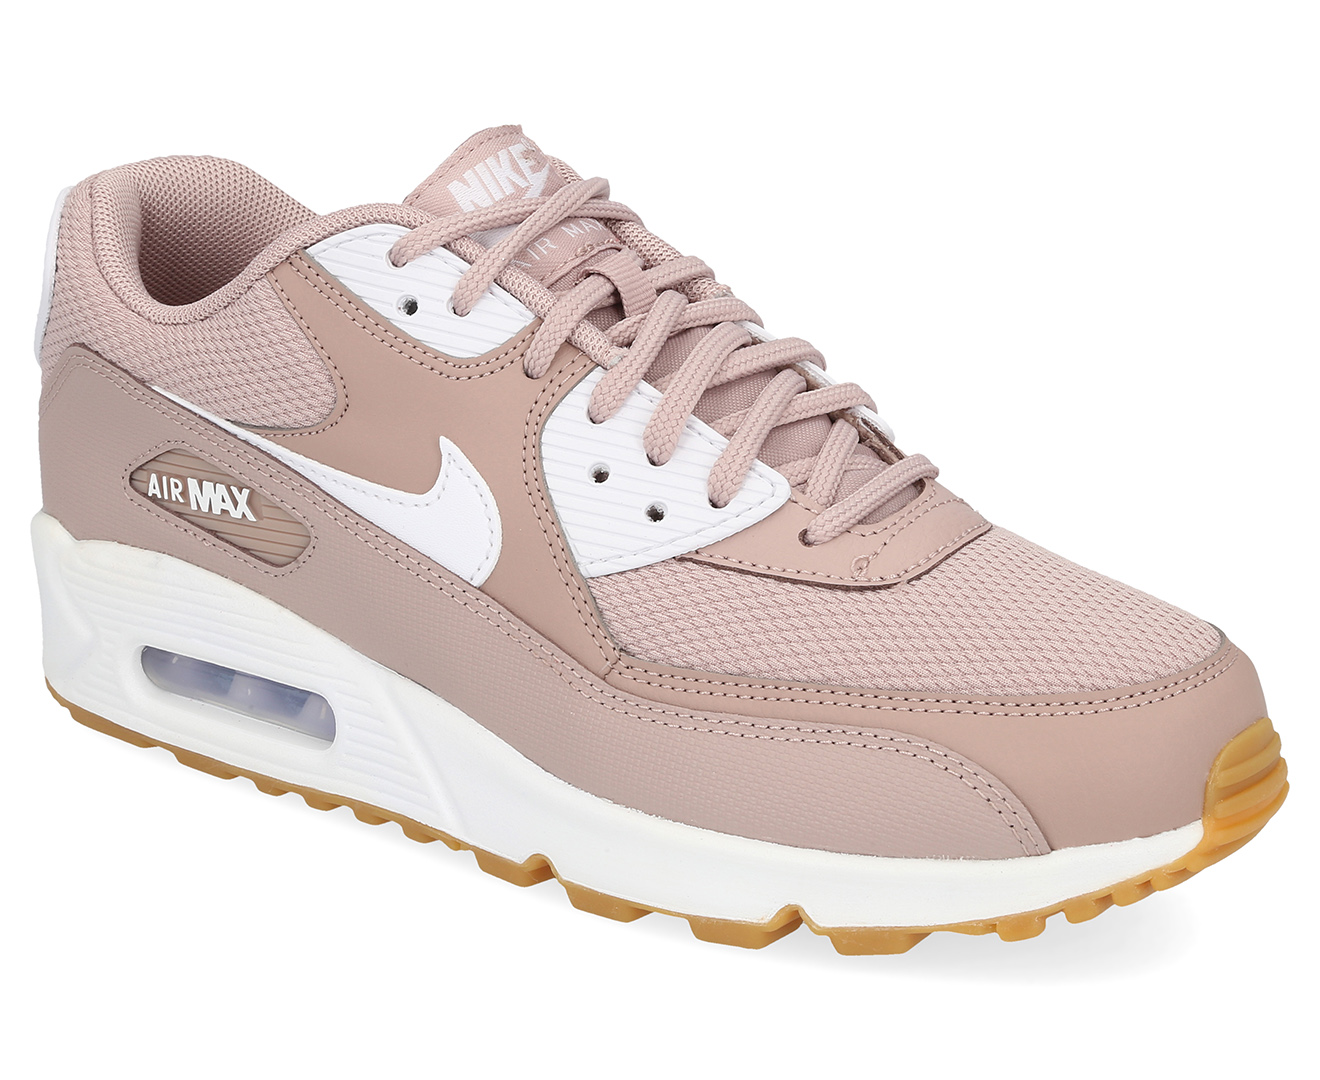 zanger roltrap piloot Nike Women's Air Max 90 Ultra 2.0 Essential Shoe - Diffused Taupe/White |  Catch.co.nz